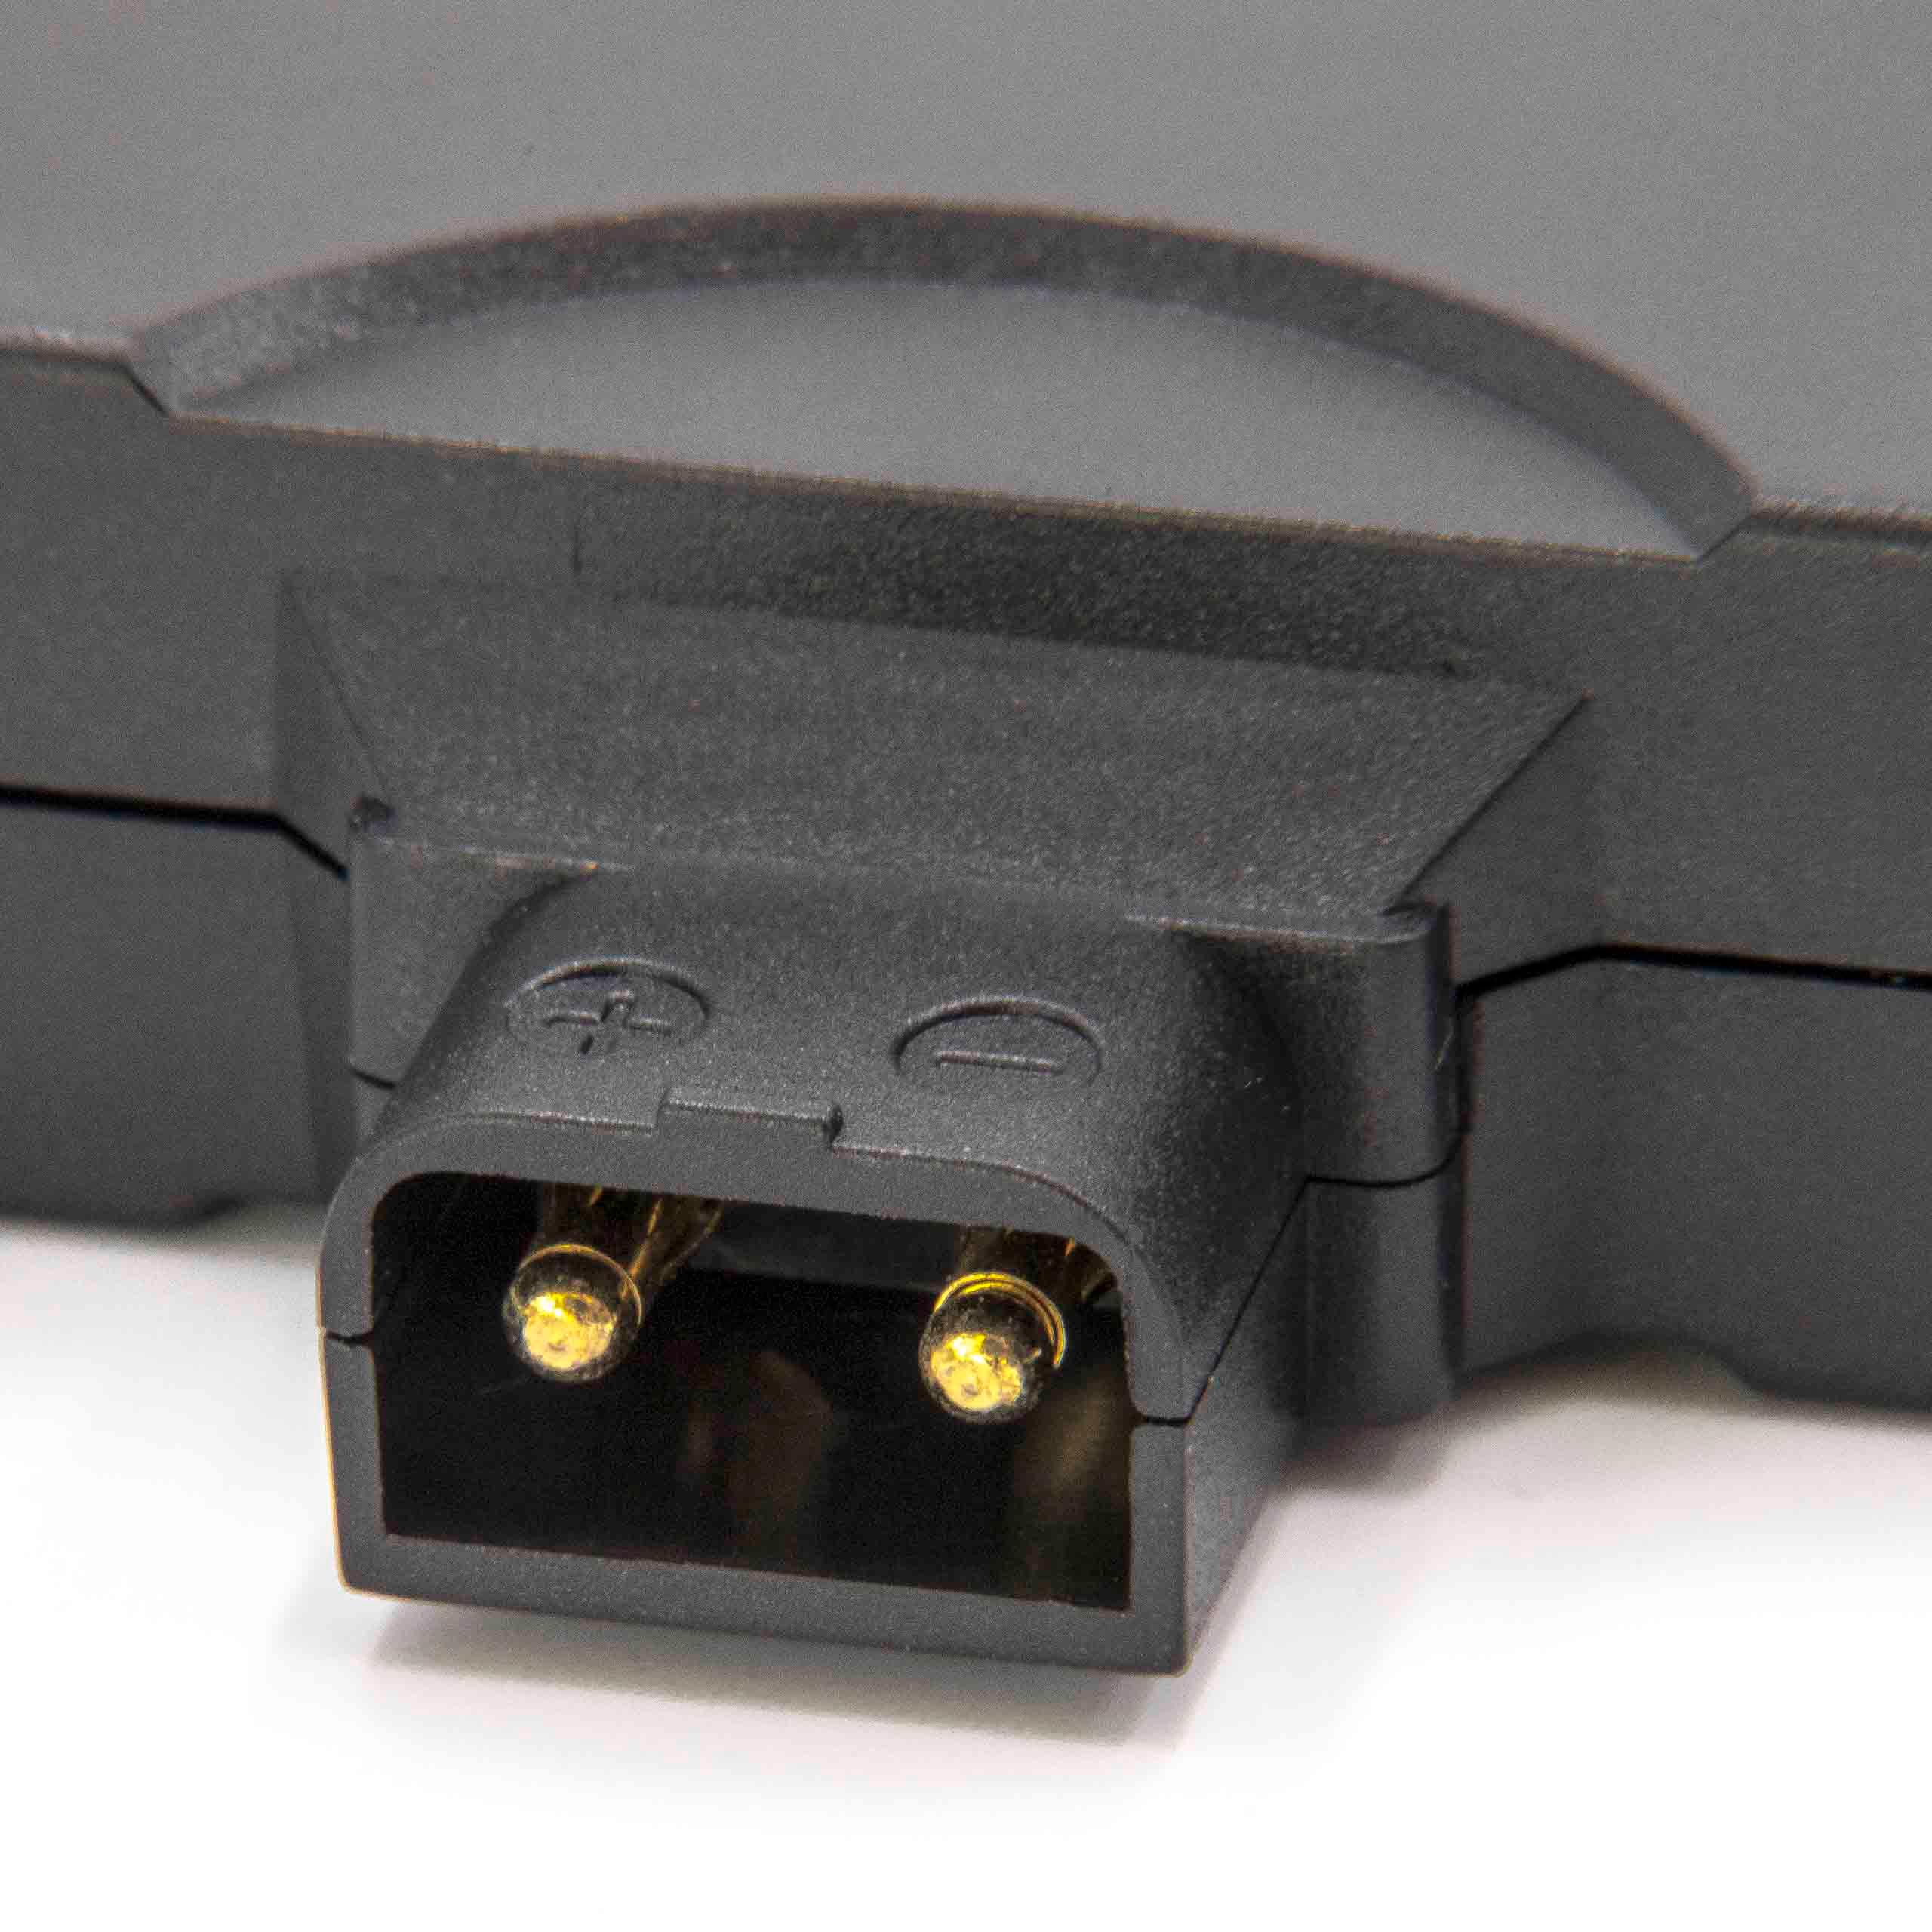 vhbw Adapter D-Tap (male) to USB port (female) for Camera Batteries